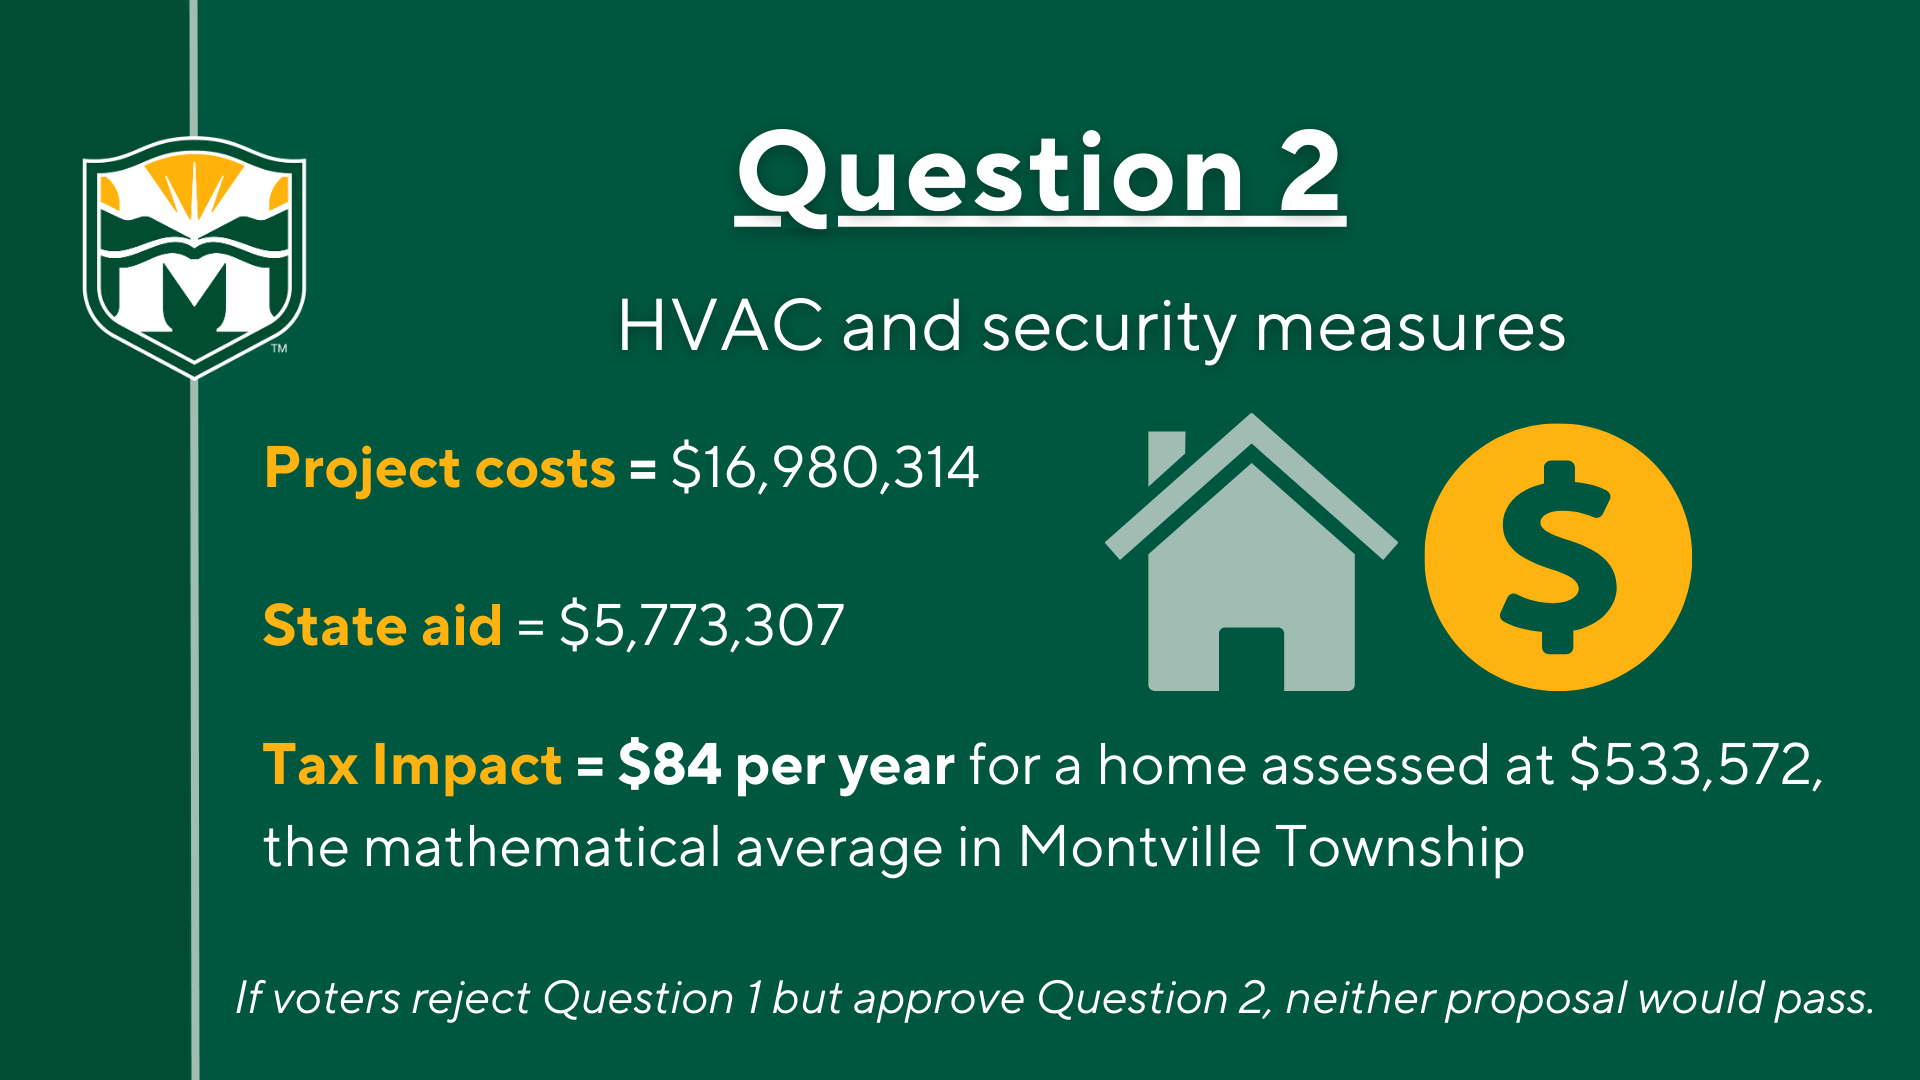 Question 2: HVAC and security measures. Project costs = $16,980,314. State aid = $5,773,307. Tax impact = $84 per year for a home assessed at $533,572, the mathematical average in Montville Township. If voters reject Question 1 but approve Question 2, neither proposal would pass.